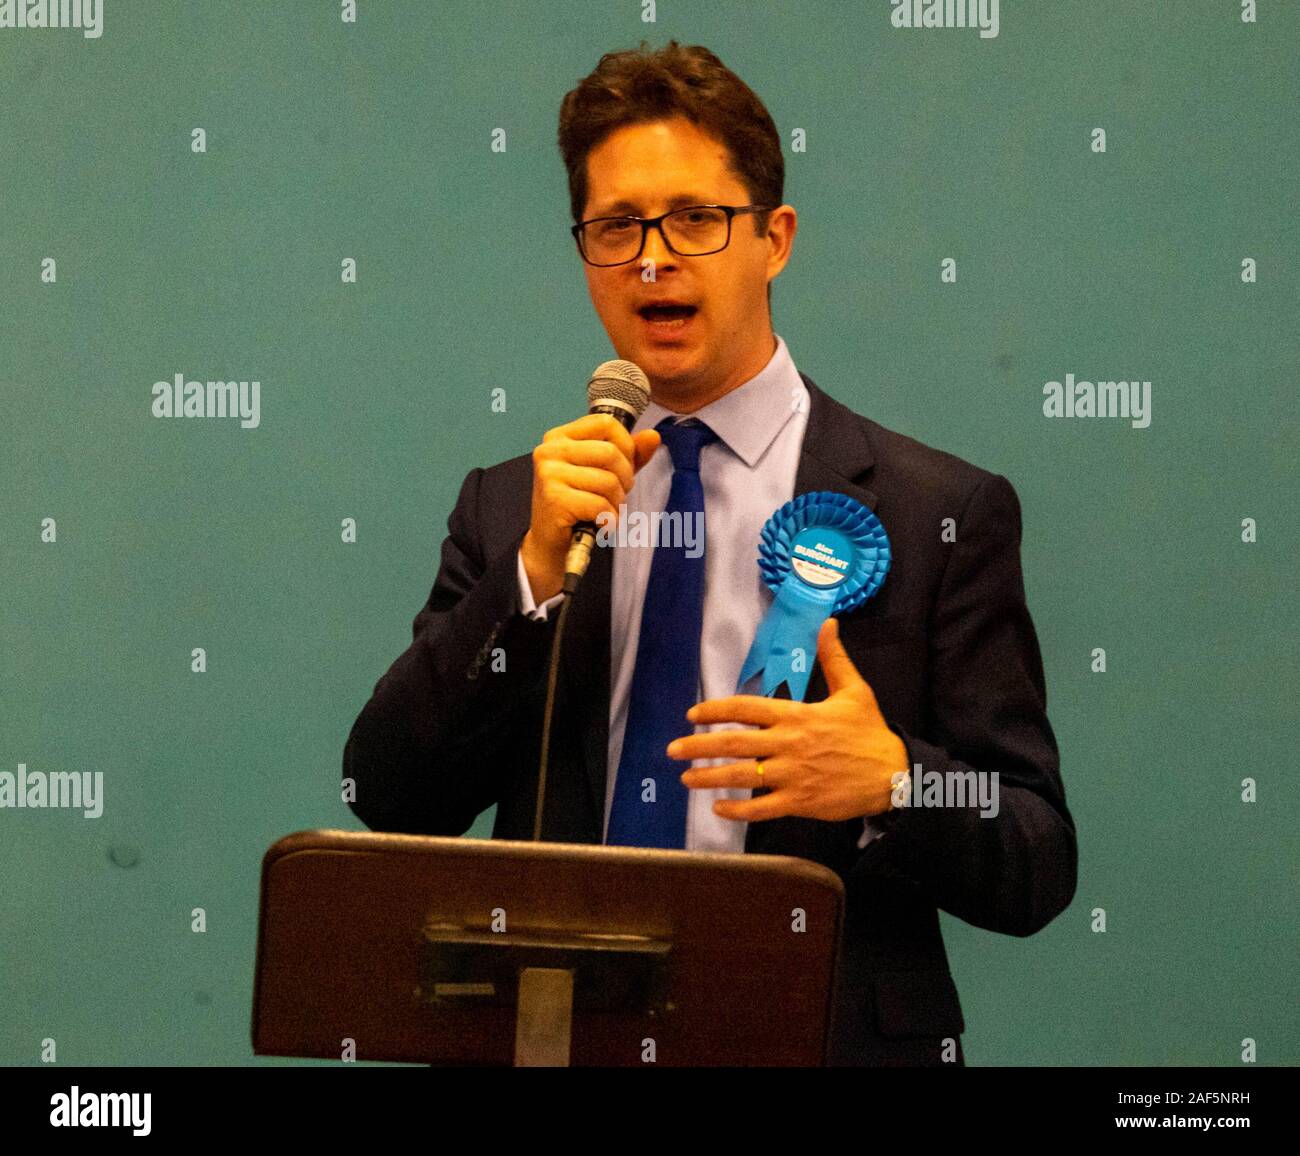 Brentood Essex 12th Dec. 2019 Election count at Brentwood for the constituency of Brentwood and Ongar Alex Burghart, the new MP for Brentwood and Ongar Credit: Ian Davidson/Alamy Live News Stock Photo